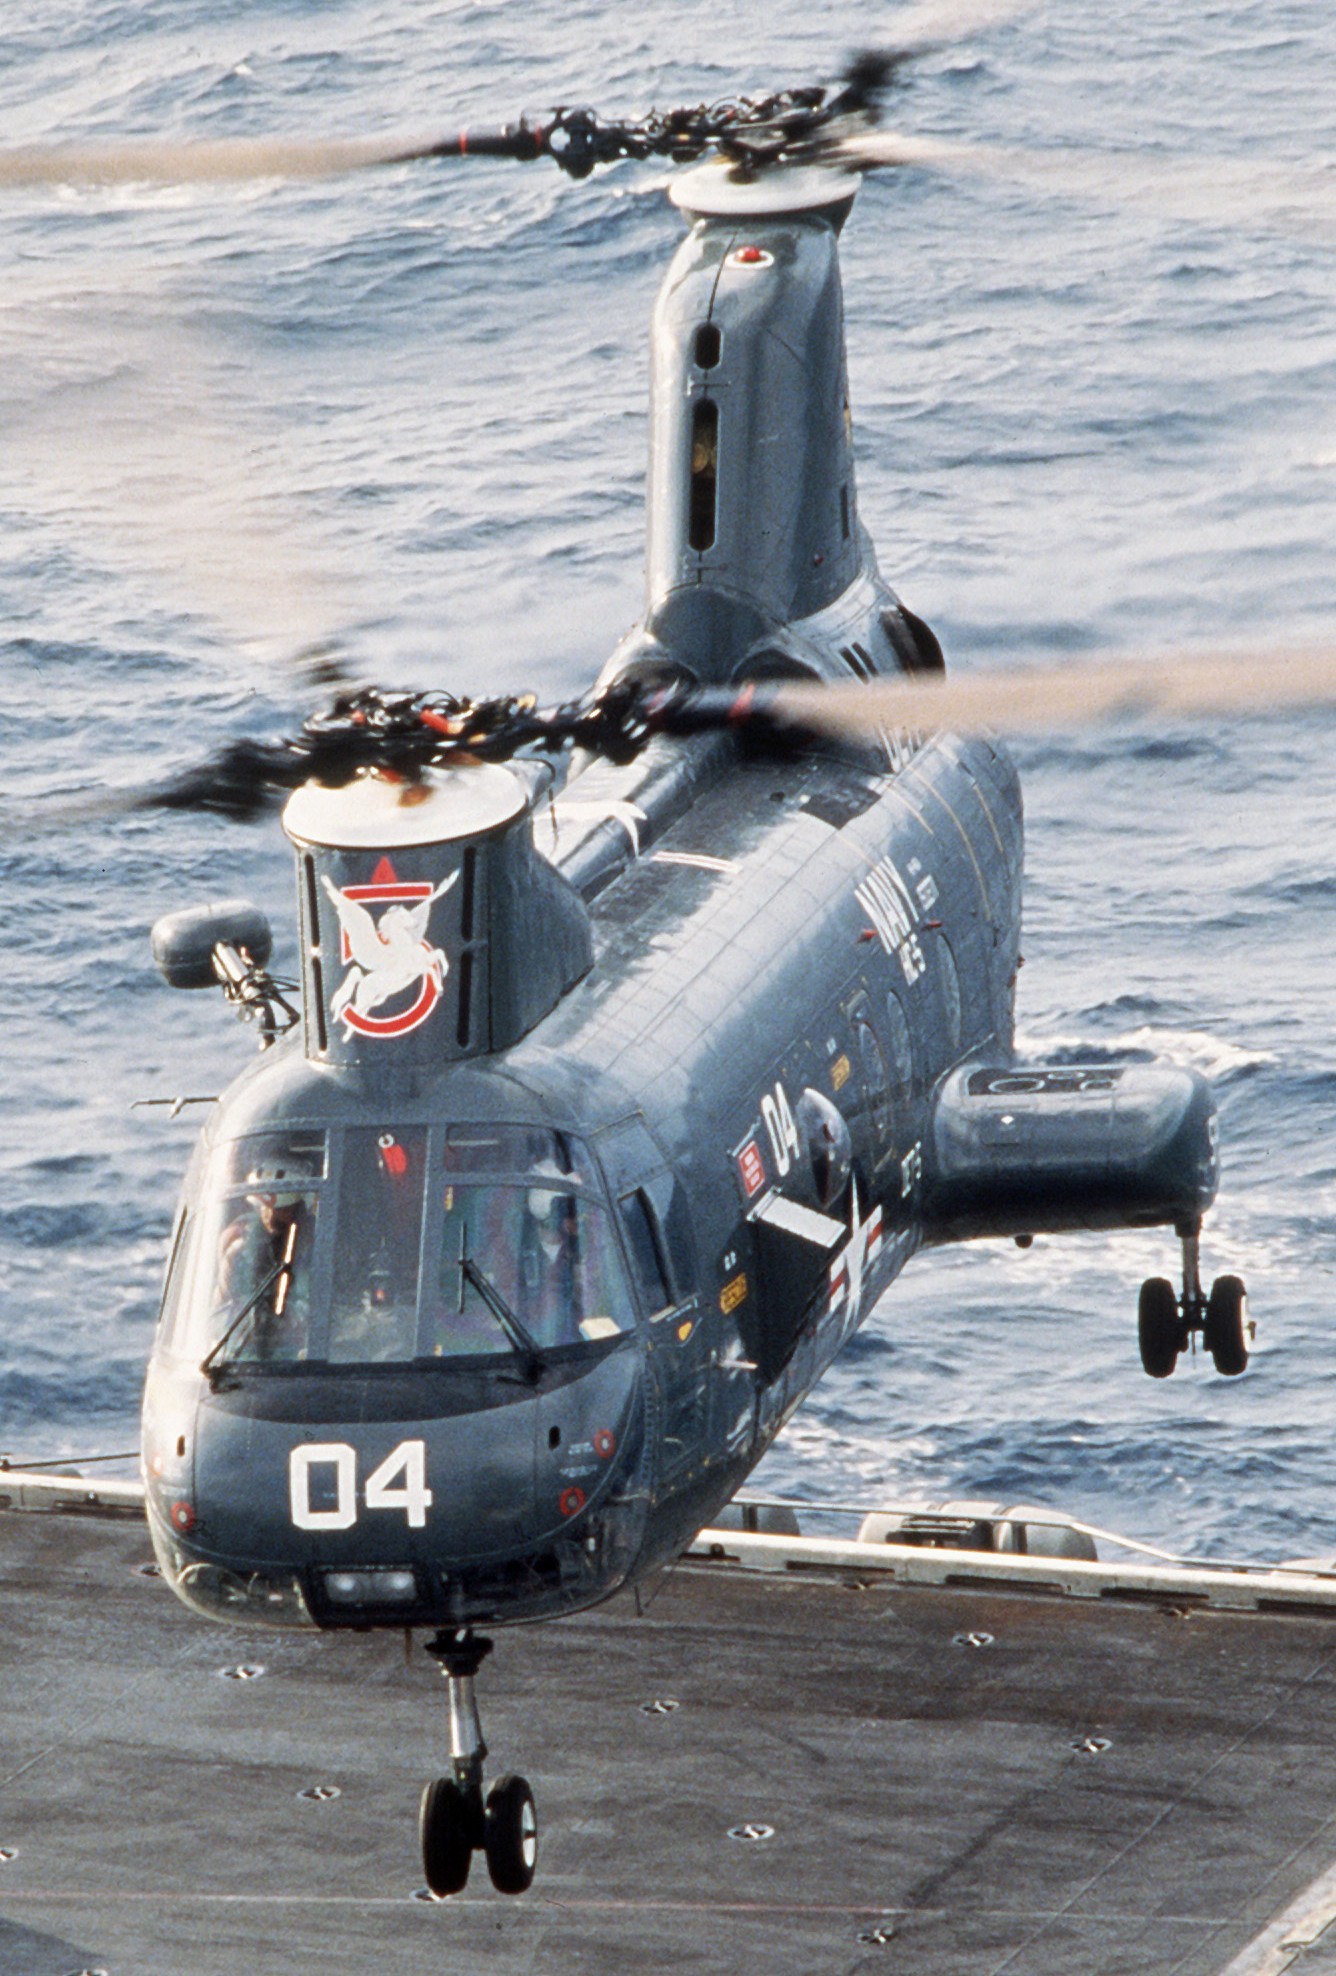 hc-5 providers helicopter combat support squadron navy hh-46a sea knight 39